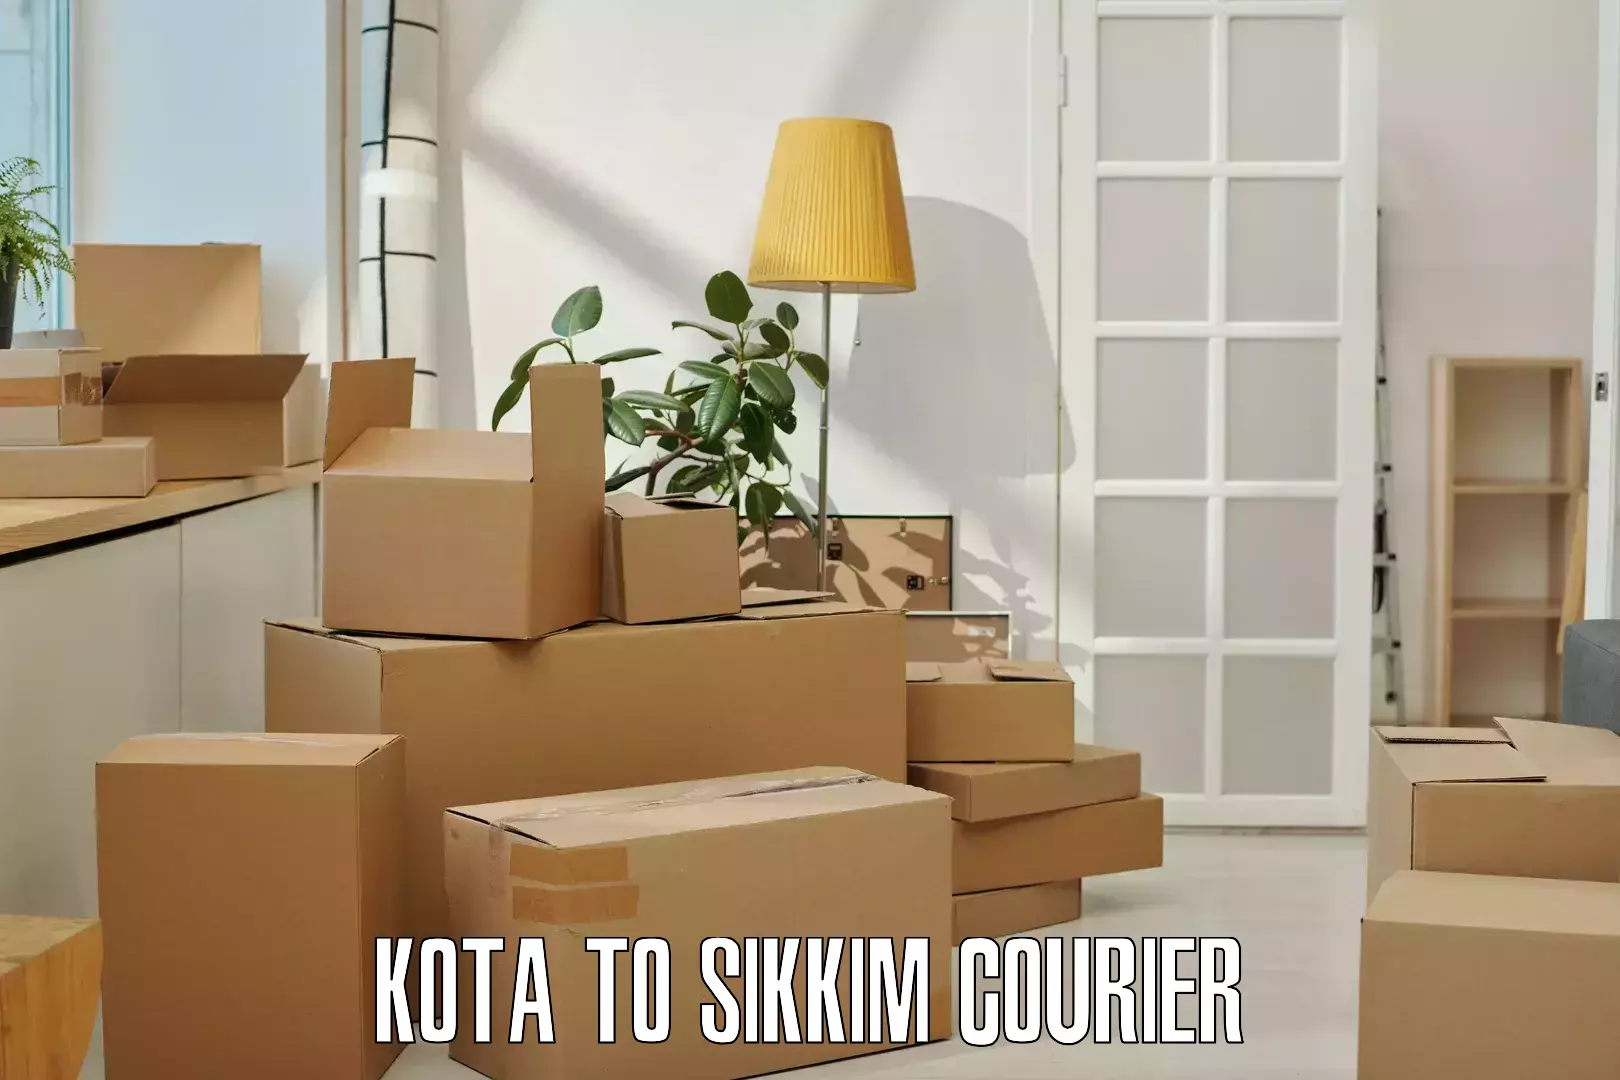 Nationwide shipping coverage Kota to Pelling